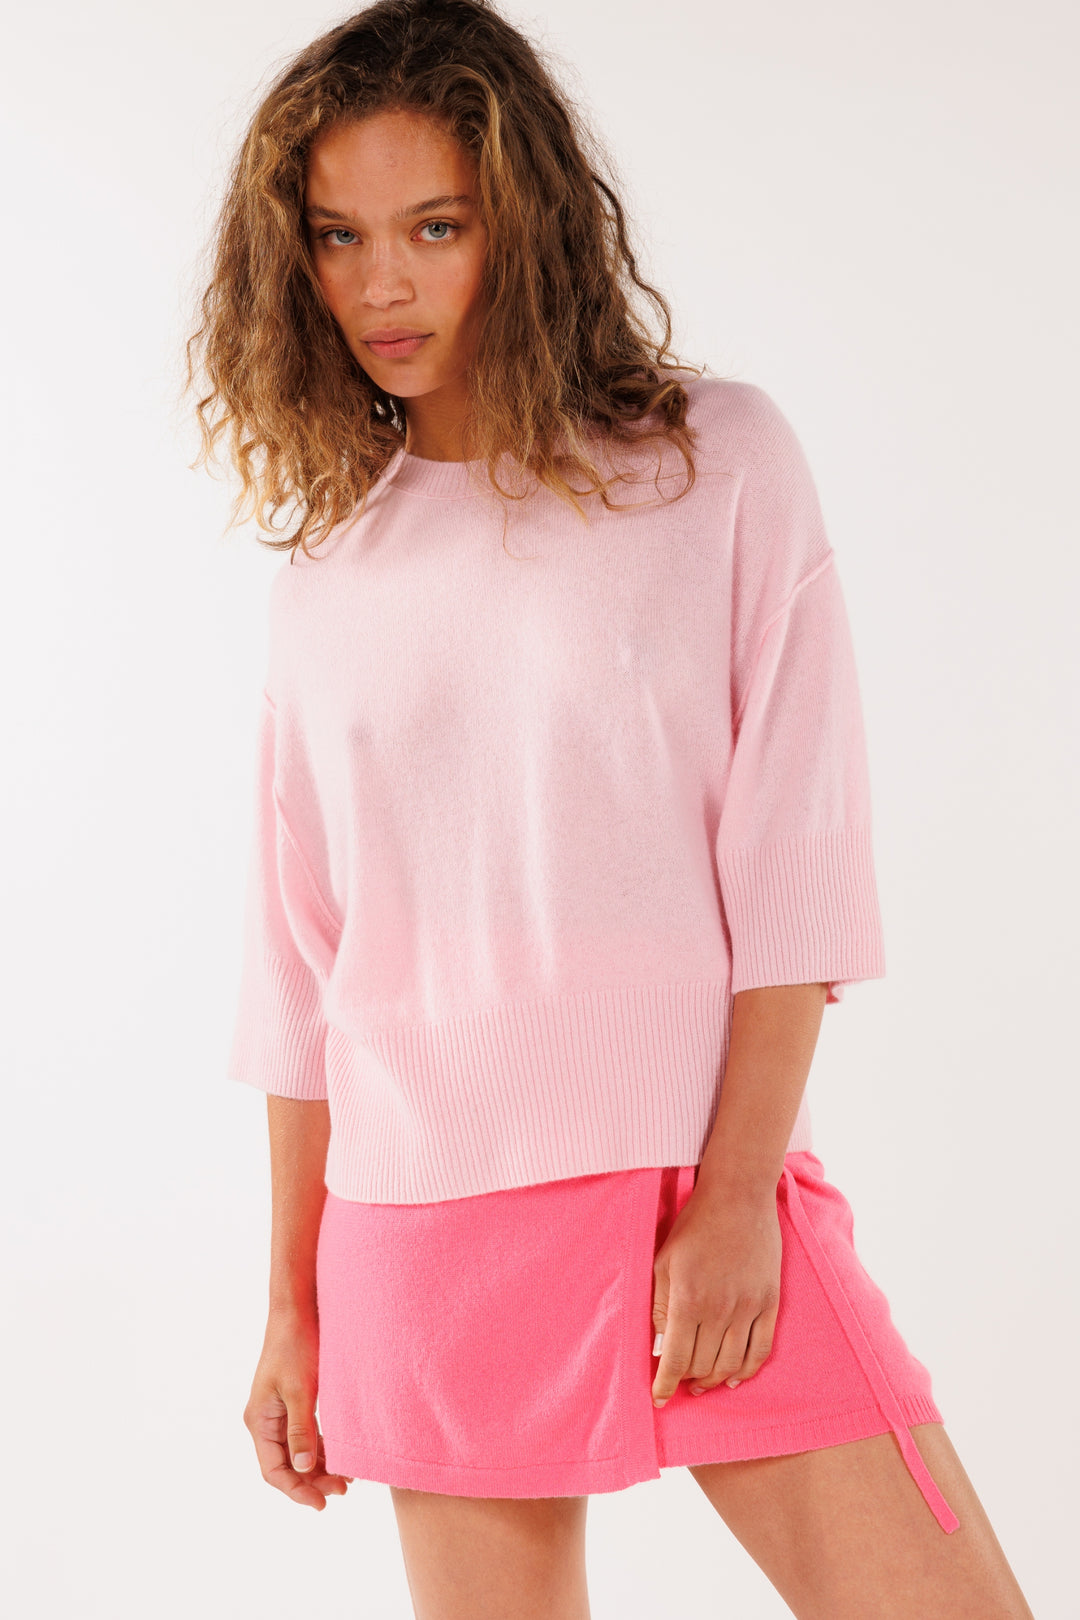 FLAMENCO TEE-CANDY FLOSS - Kingfisher Road - Online Boutique